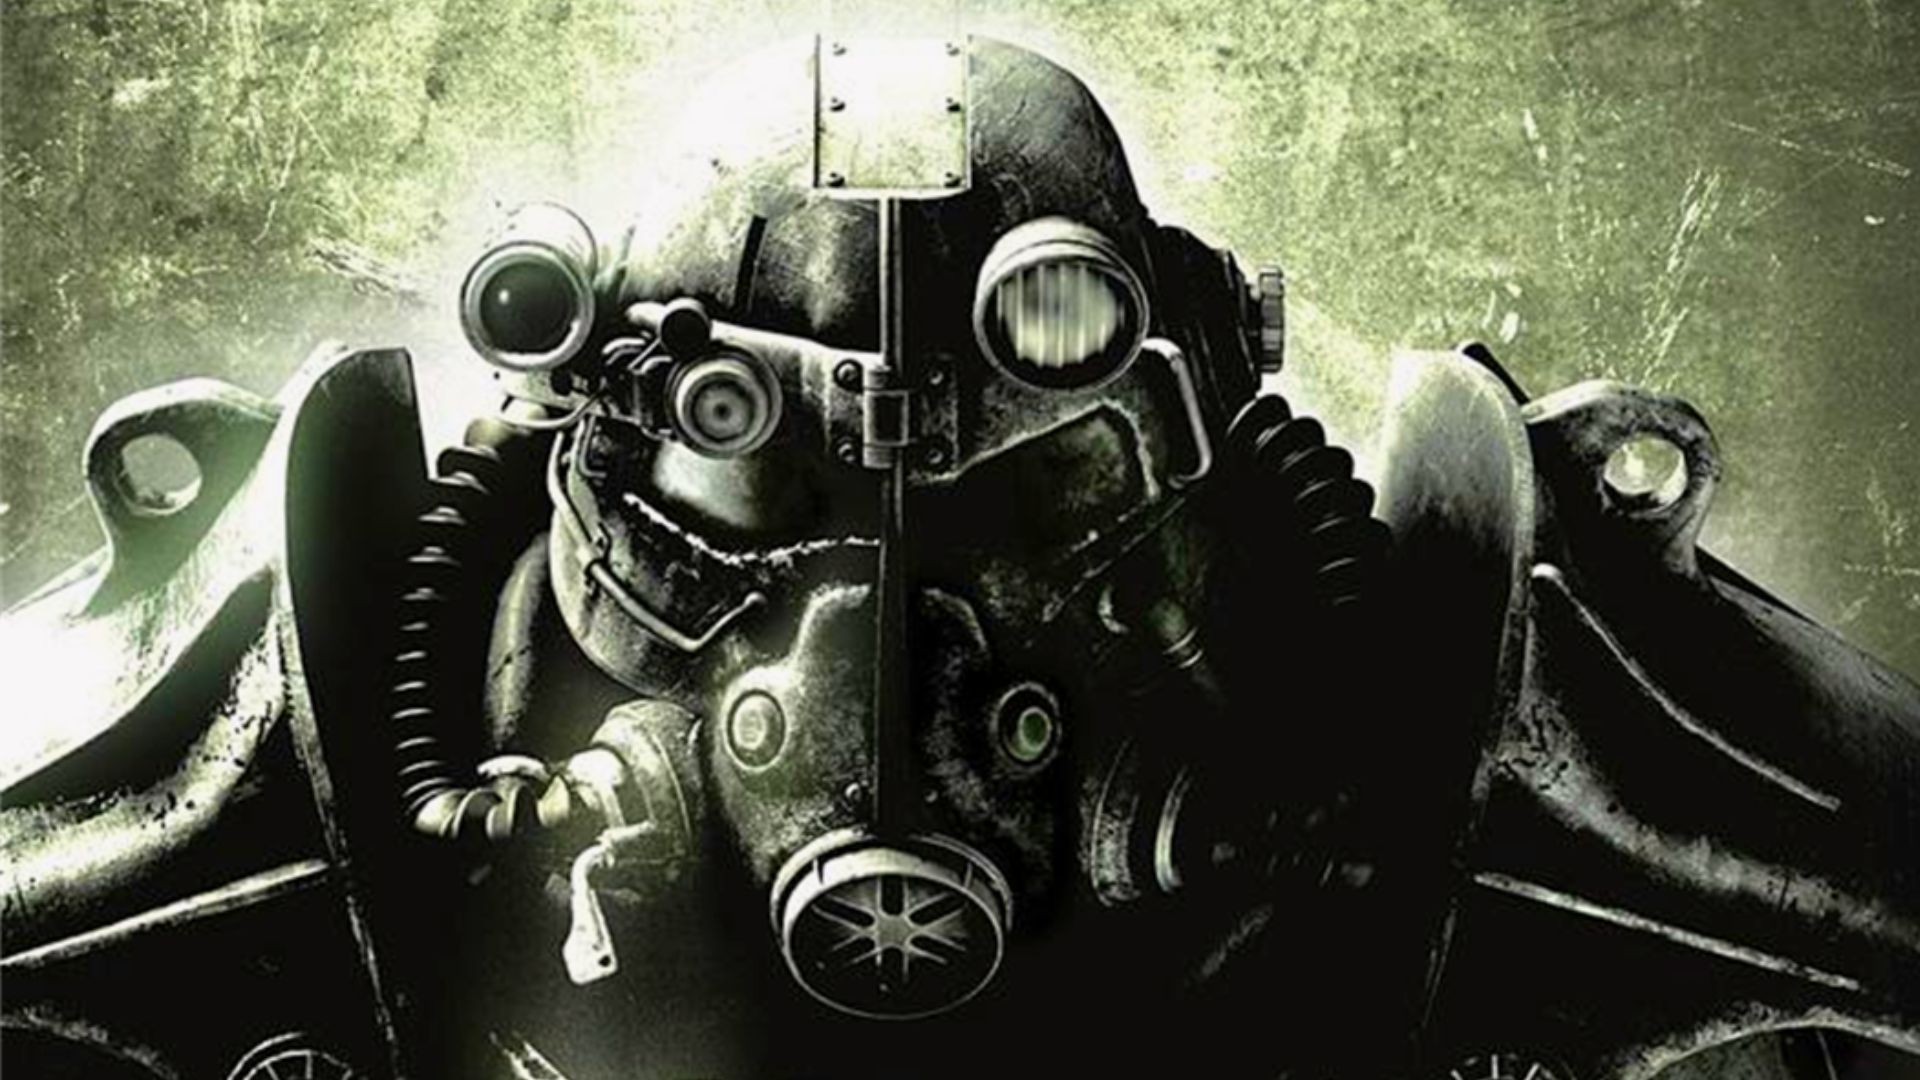 All Fallout Games, Ranked From Worst to Best